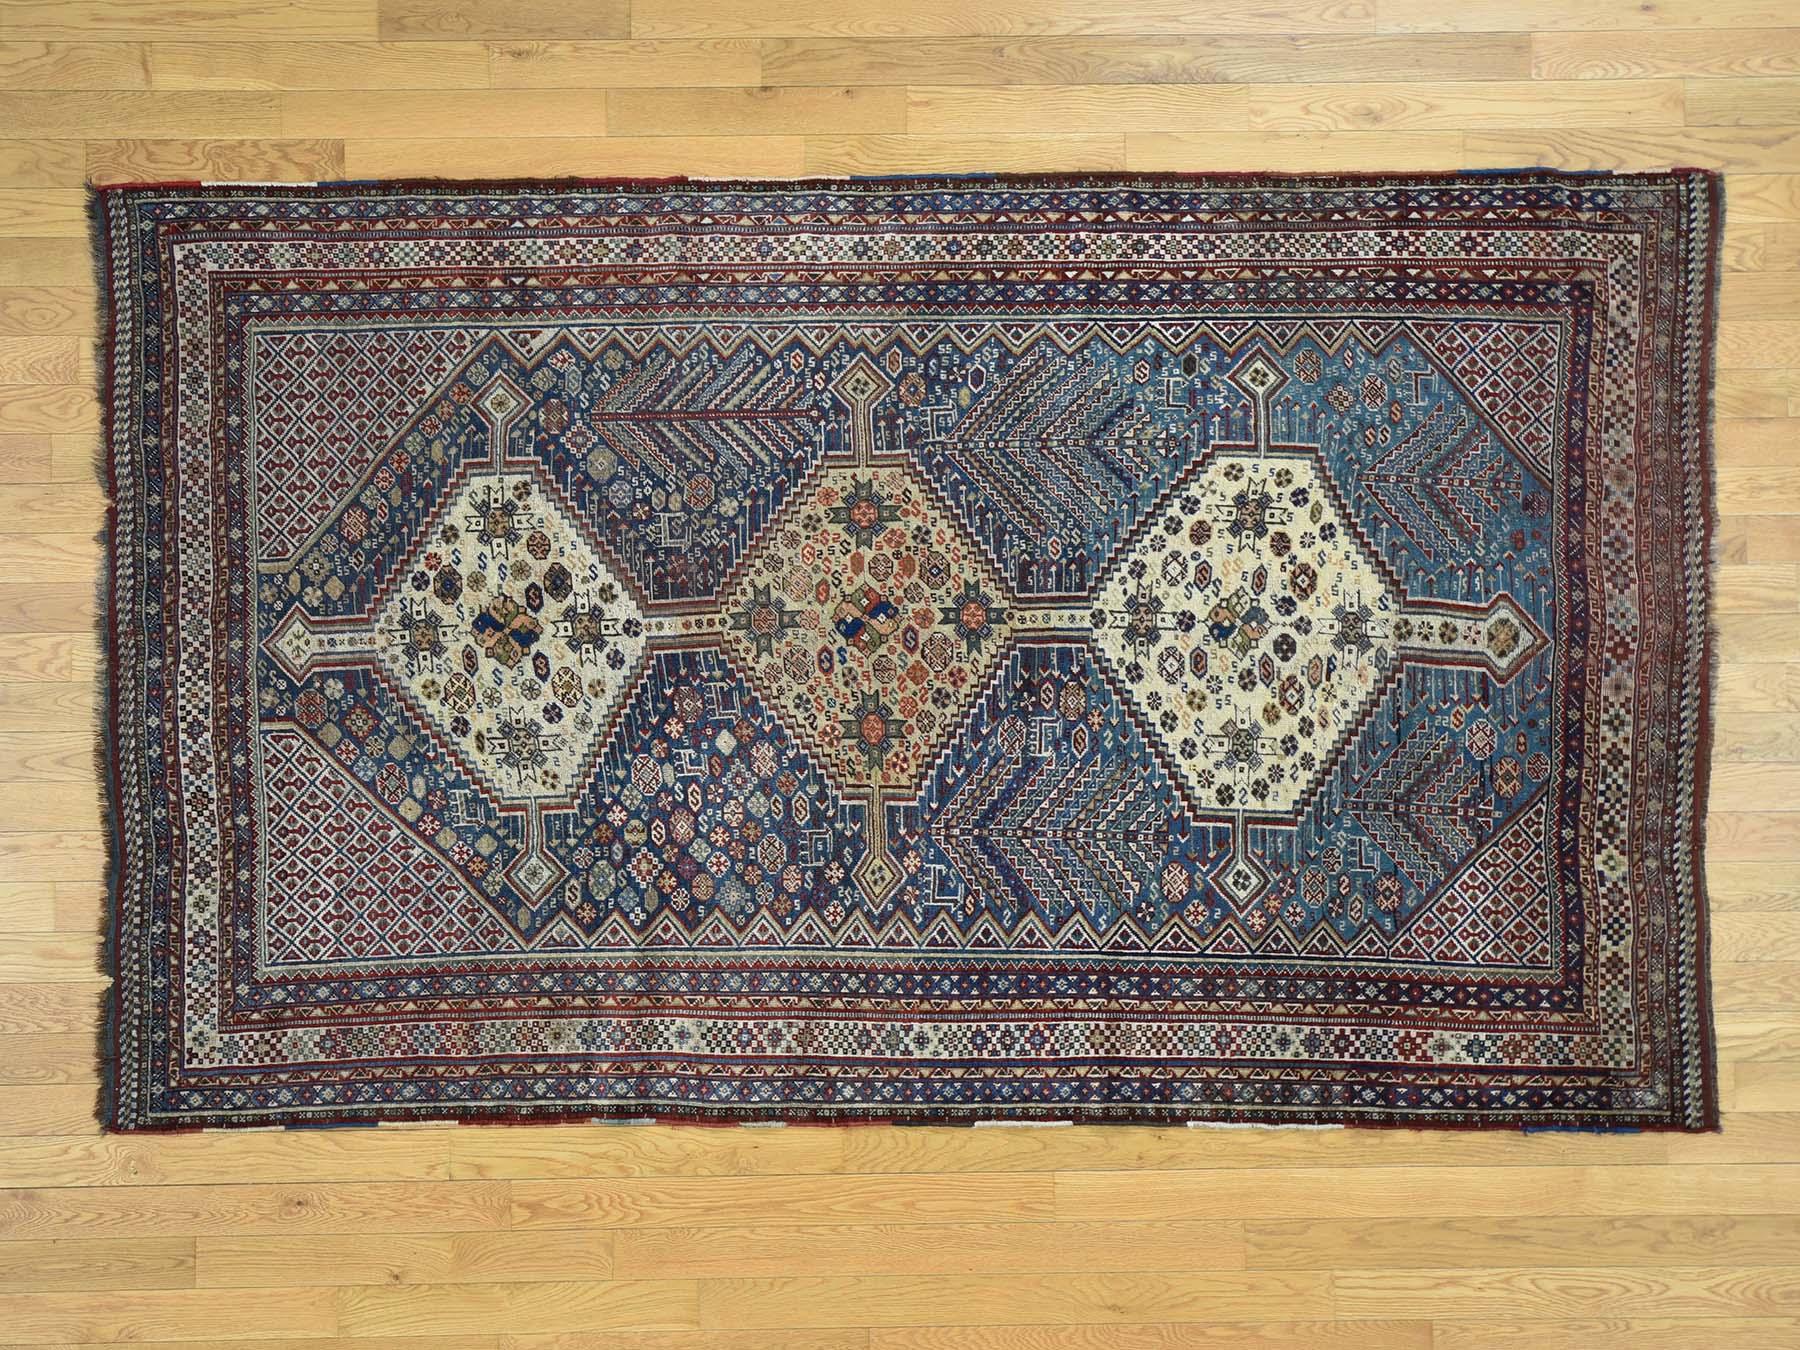 This is a genuine hand knotted oriental rug. It is not hand tufted or machine made rug. Our entire inventory is made of either hand knotted or handwoven rugs.

Remodel your home with this stunning antique carpet. This handcrafted Persian Qashqai